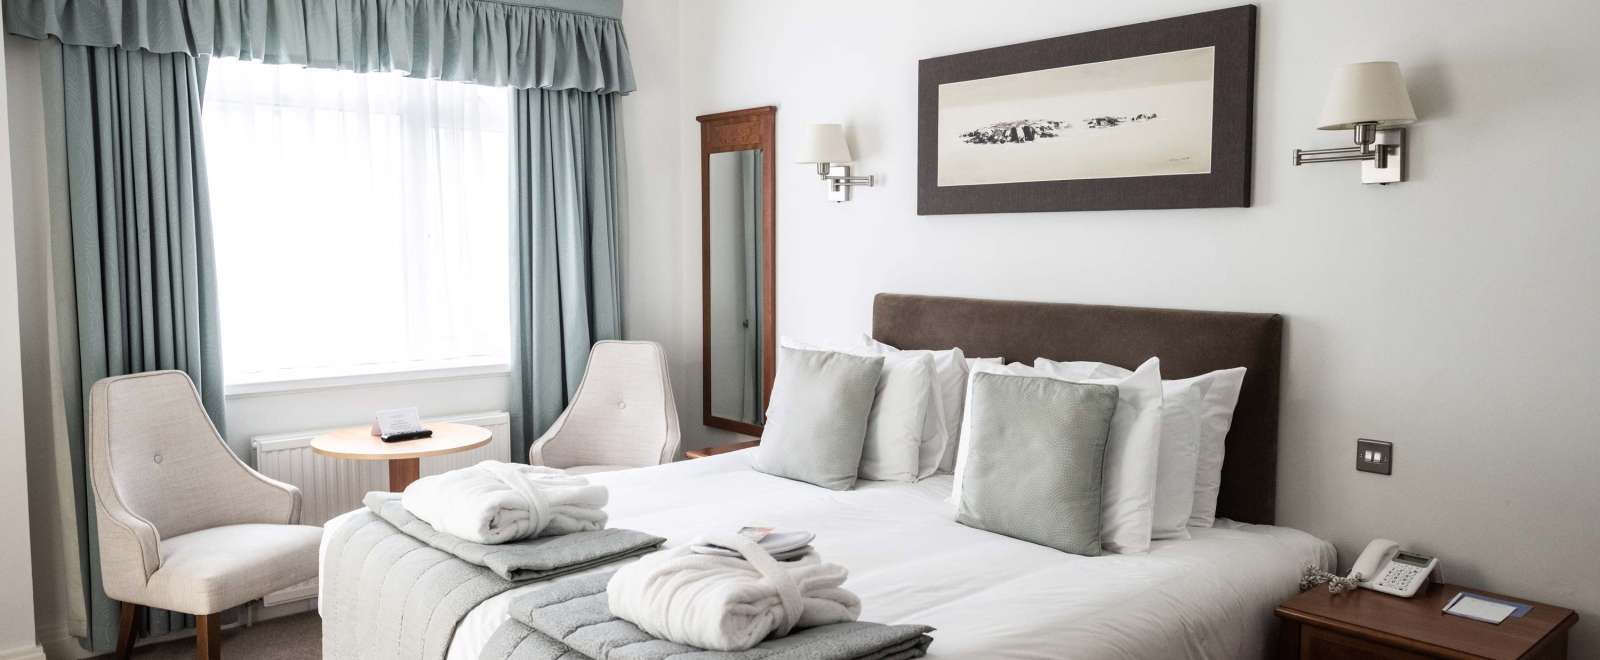 Saunton Sands Hotel Cosy Room Accommodation Bedroom with Seating Area and Dressing Gowns on Bed